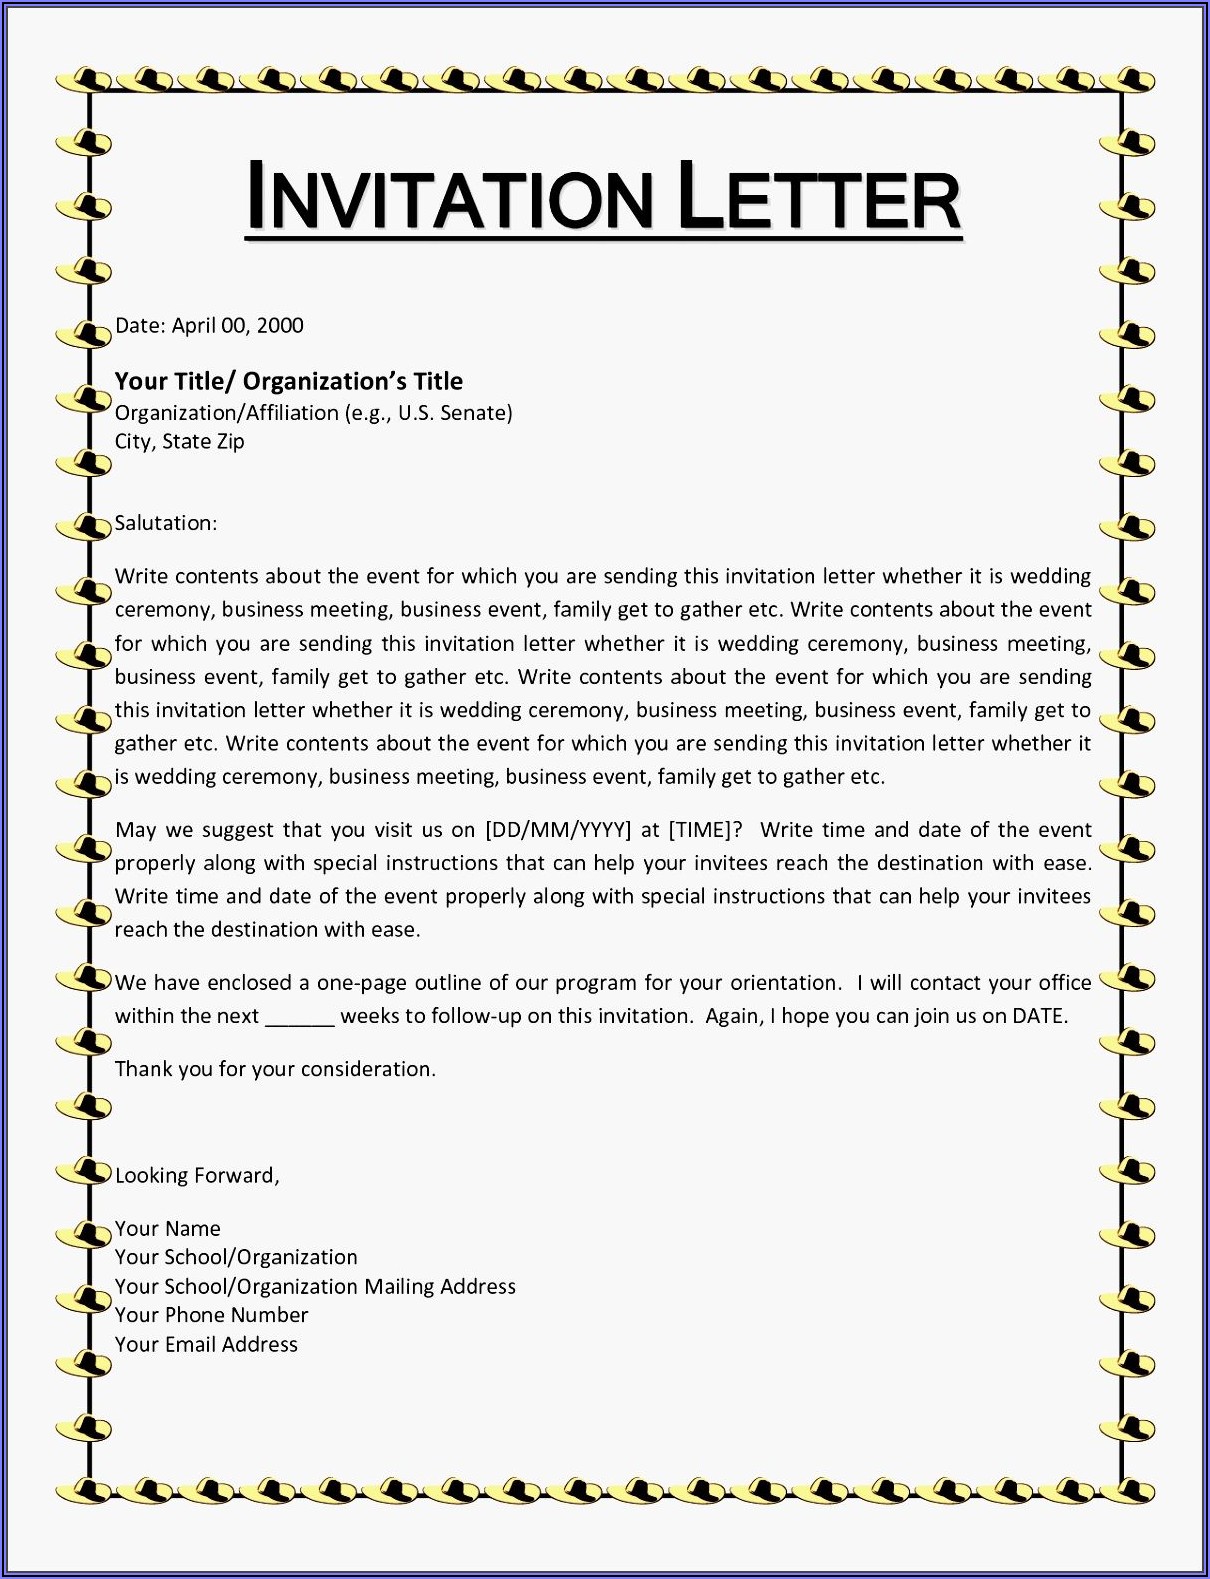 Wedding Invitation Letter To Colleagues